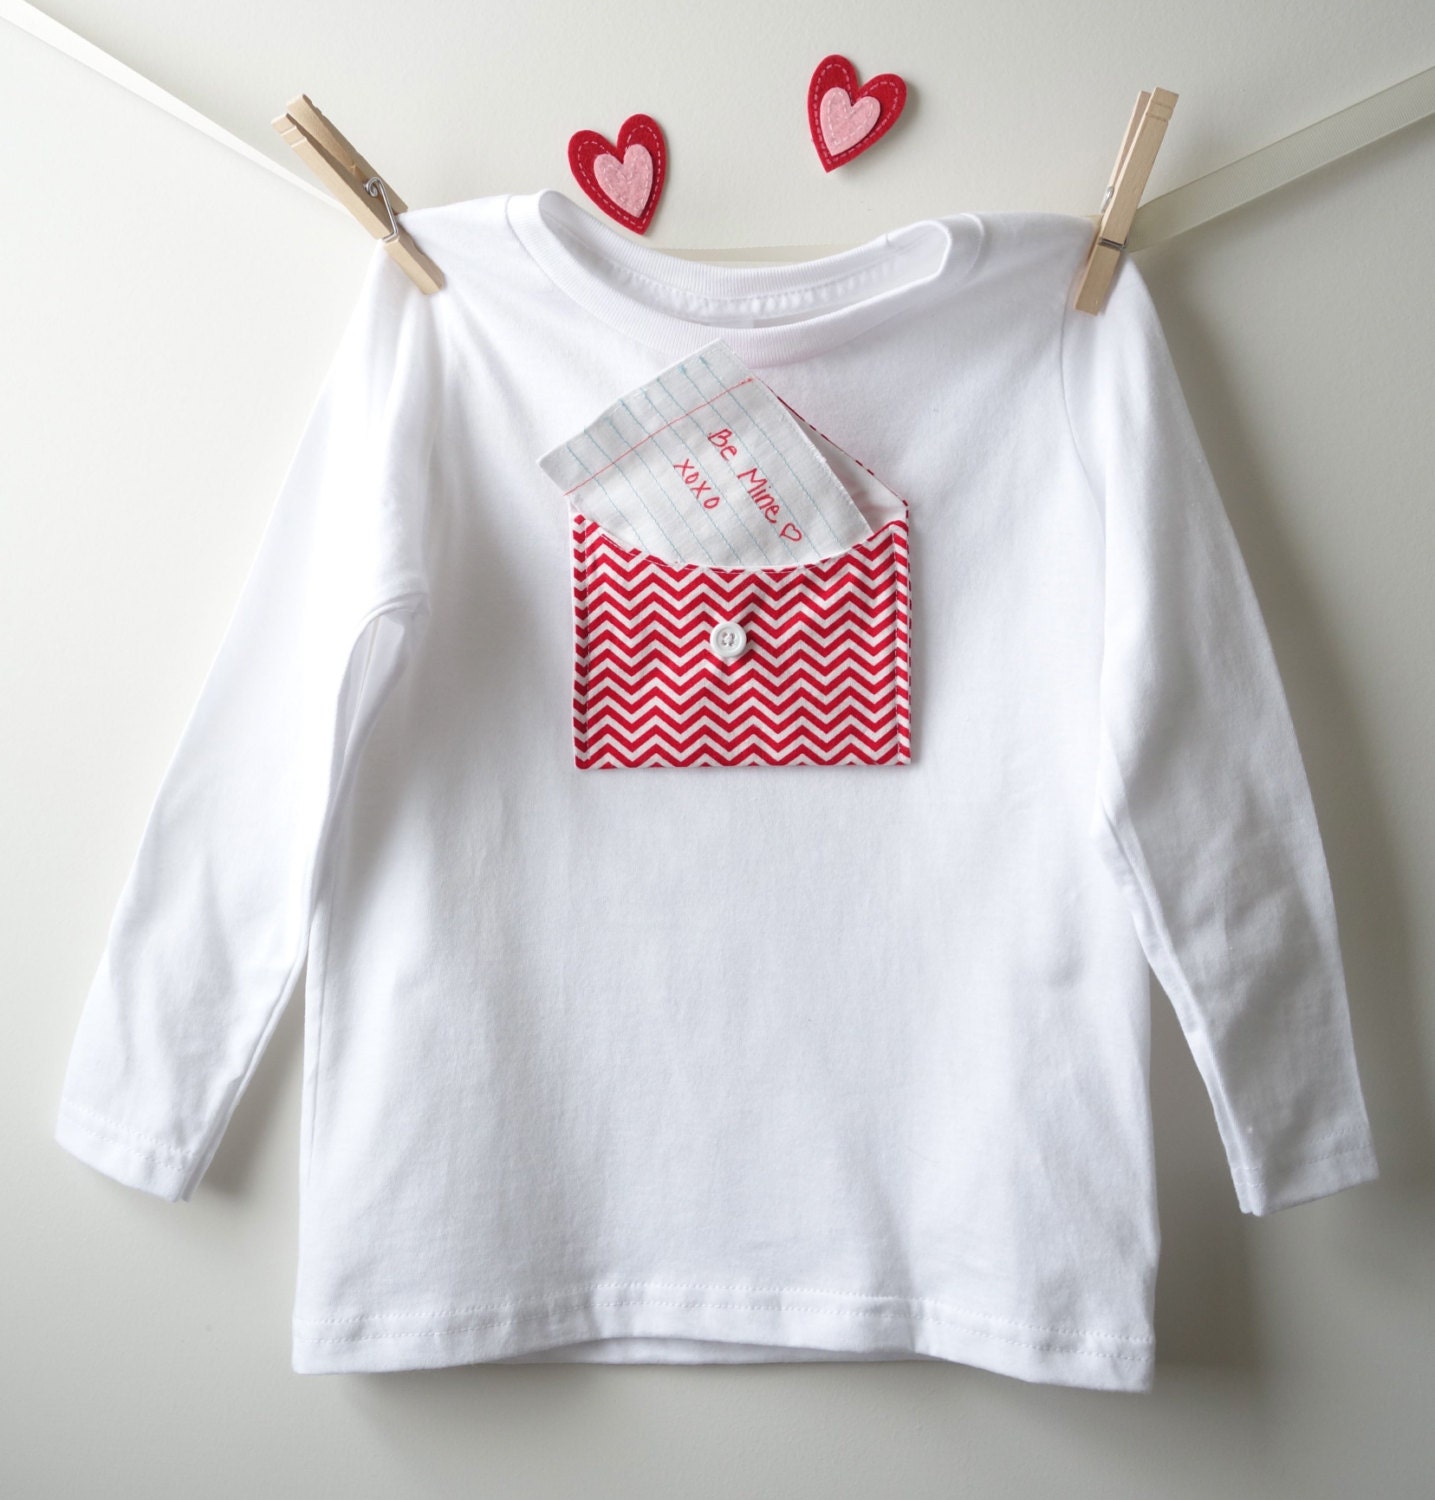 Kids Valentines Day White T shirt with chevron Print Pocket, Valentines Gift Idea for Boys or Girls, Customized Love Note Tee Size 2,4, & 6 - fernandfawn